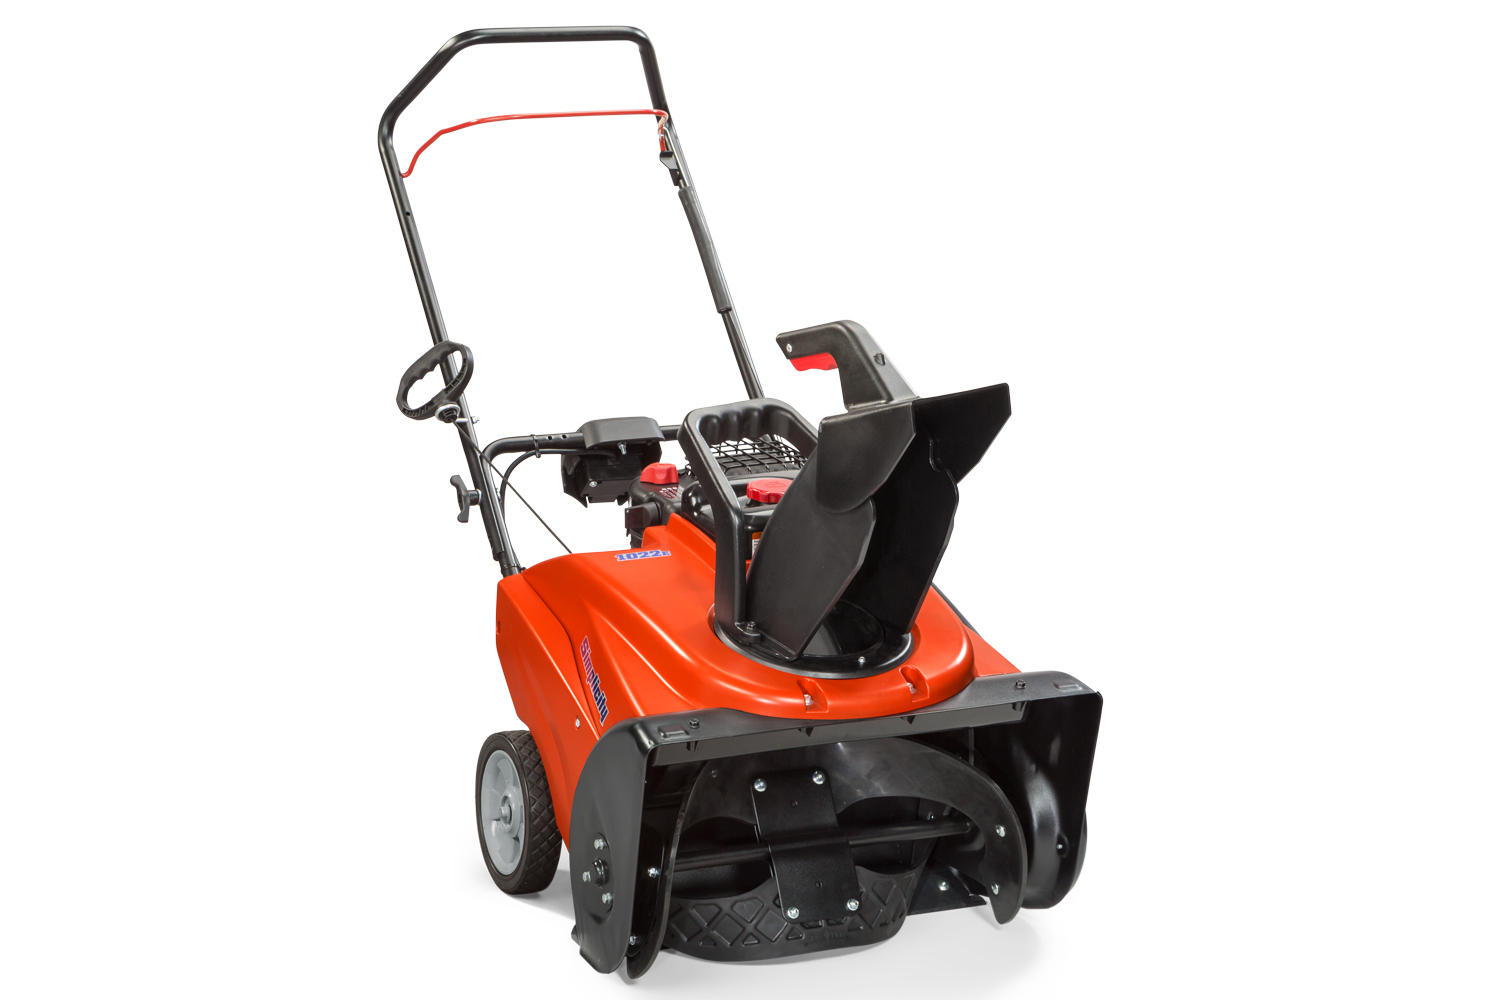 SIMPLICITY SINGLE-STAGE SNOW BLOWER 1022ER<br/>*Model shown in image may vary.